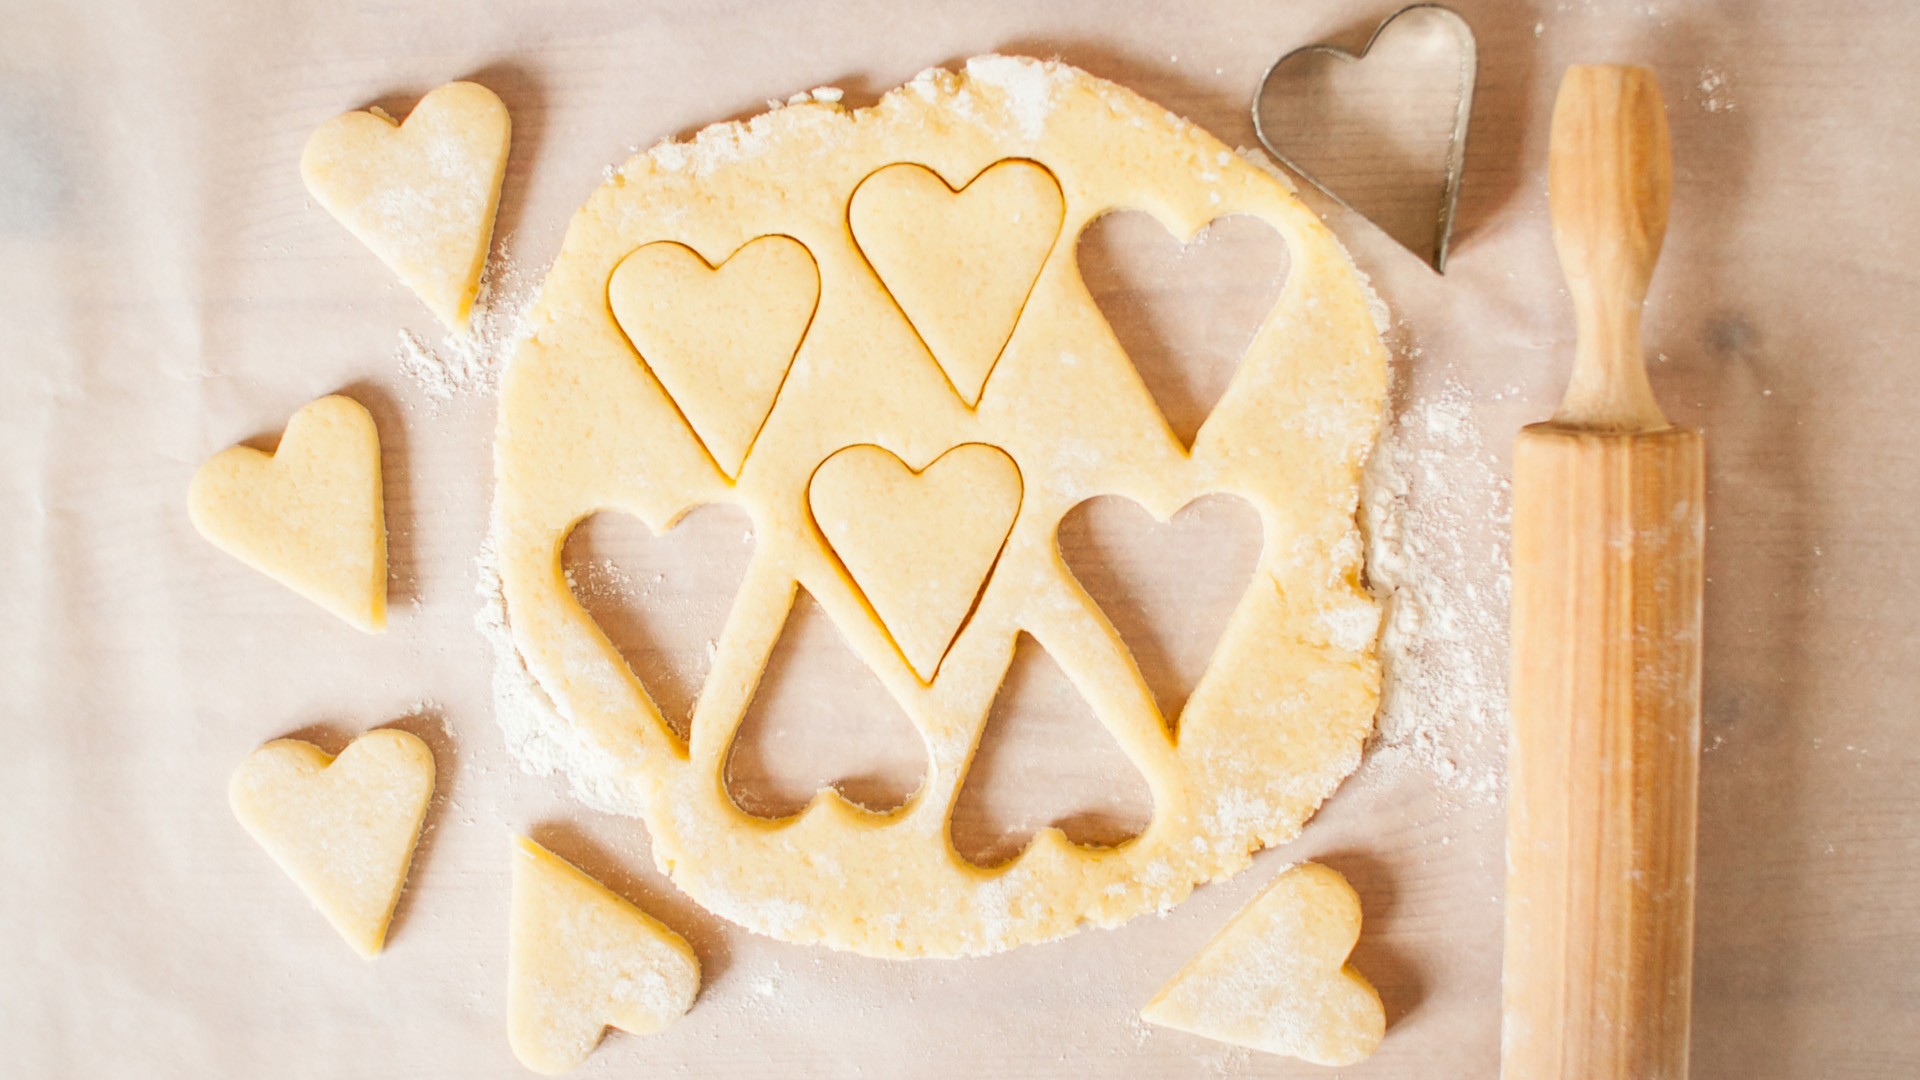 Yellow batter having been cut into shapes of love hearts with a rolling pin right next to it. Some flour on batter.